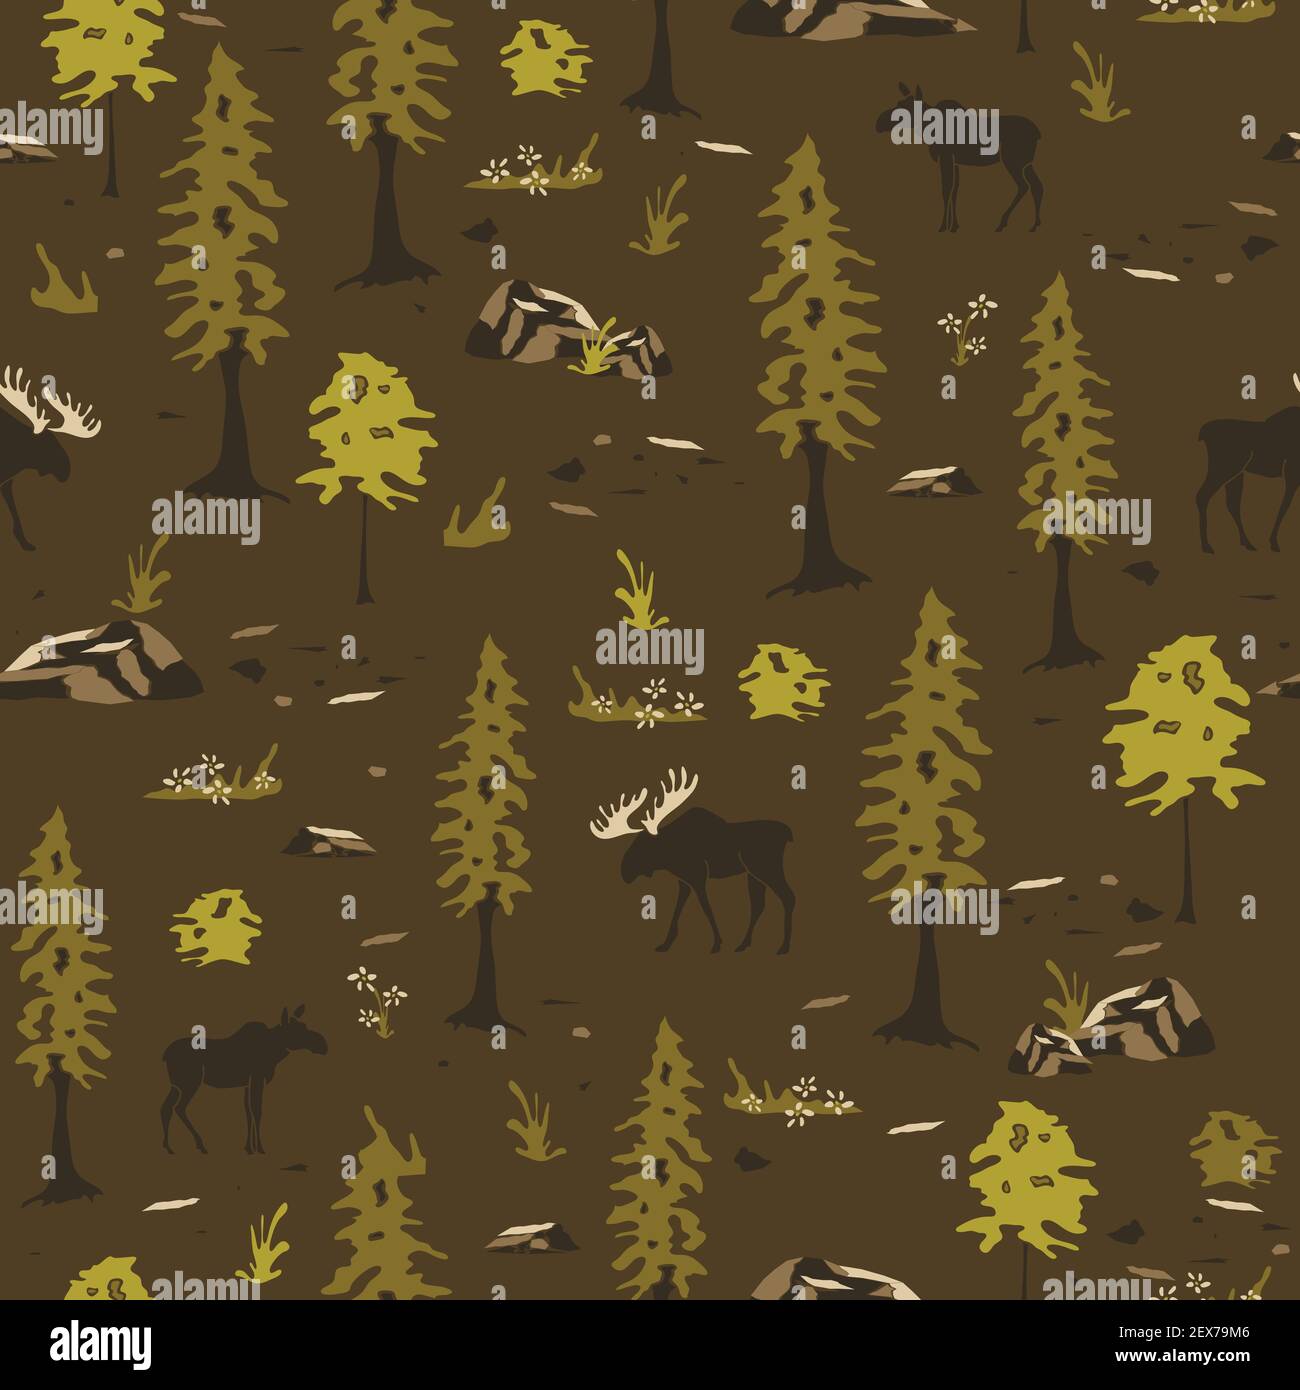 Seamless vector pattern landscape with moose and trees on brown background. Canadian forest wallpaper design. Stock Vector